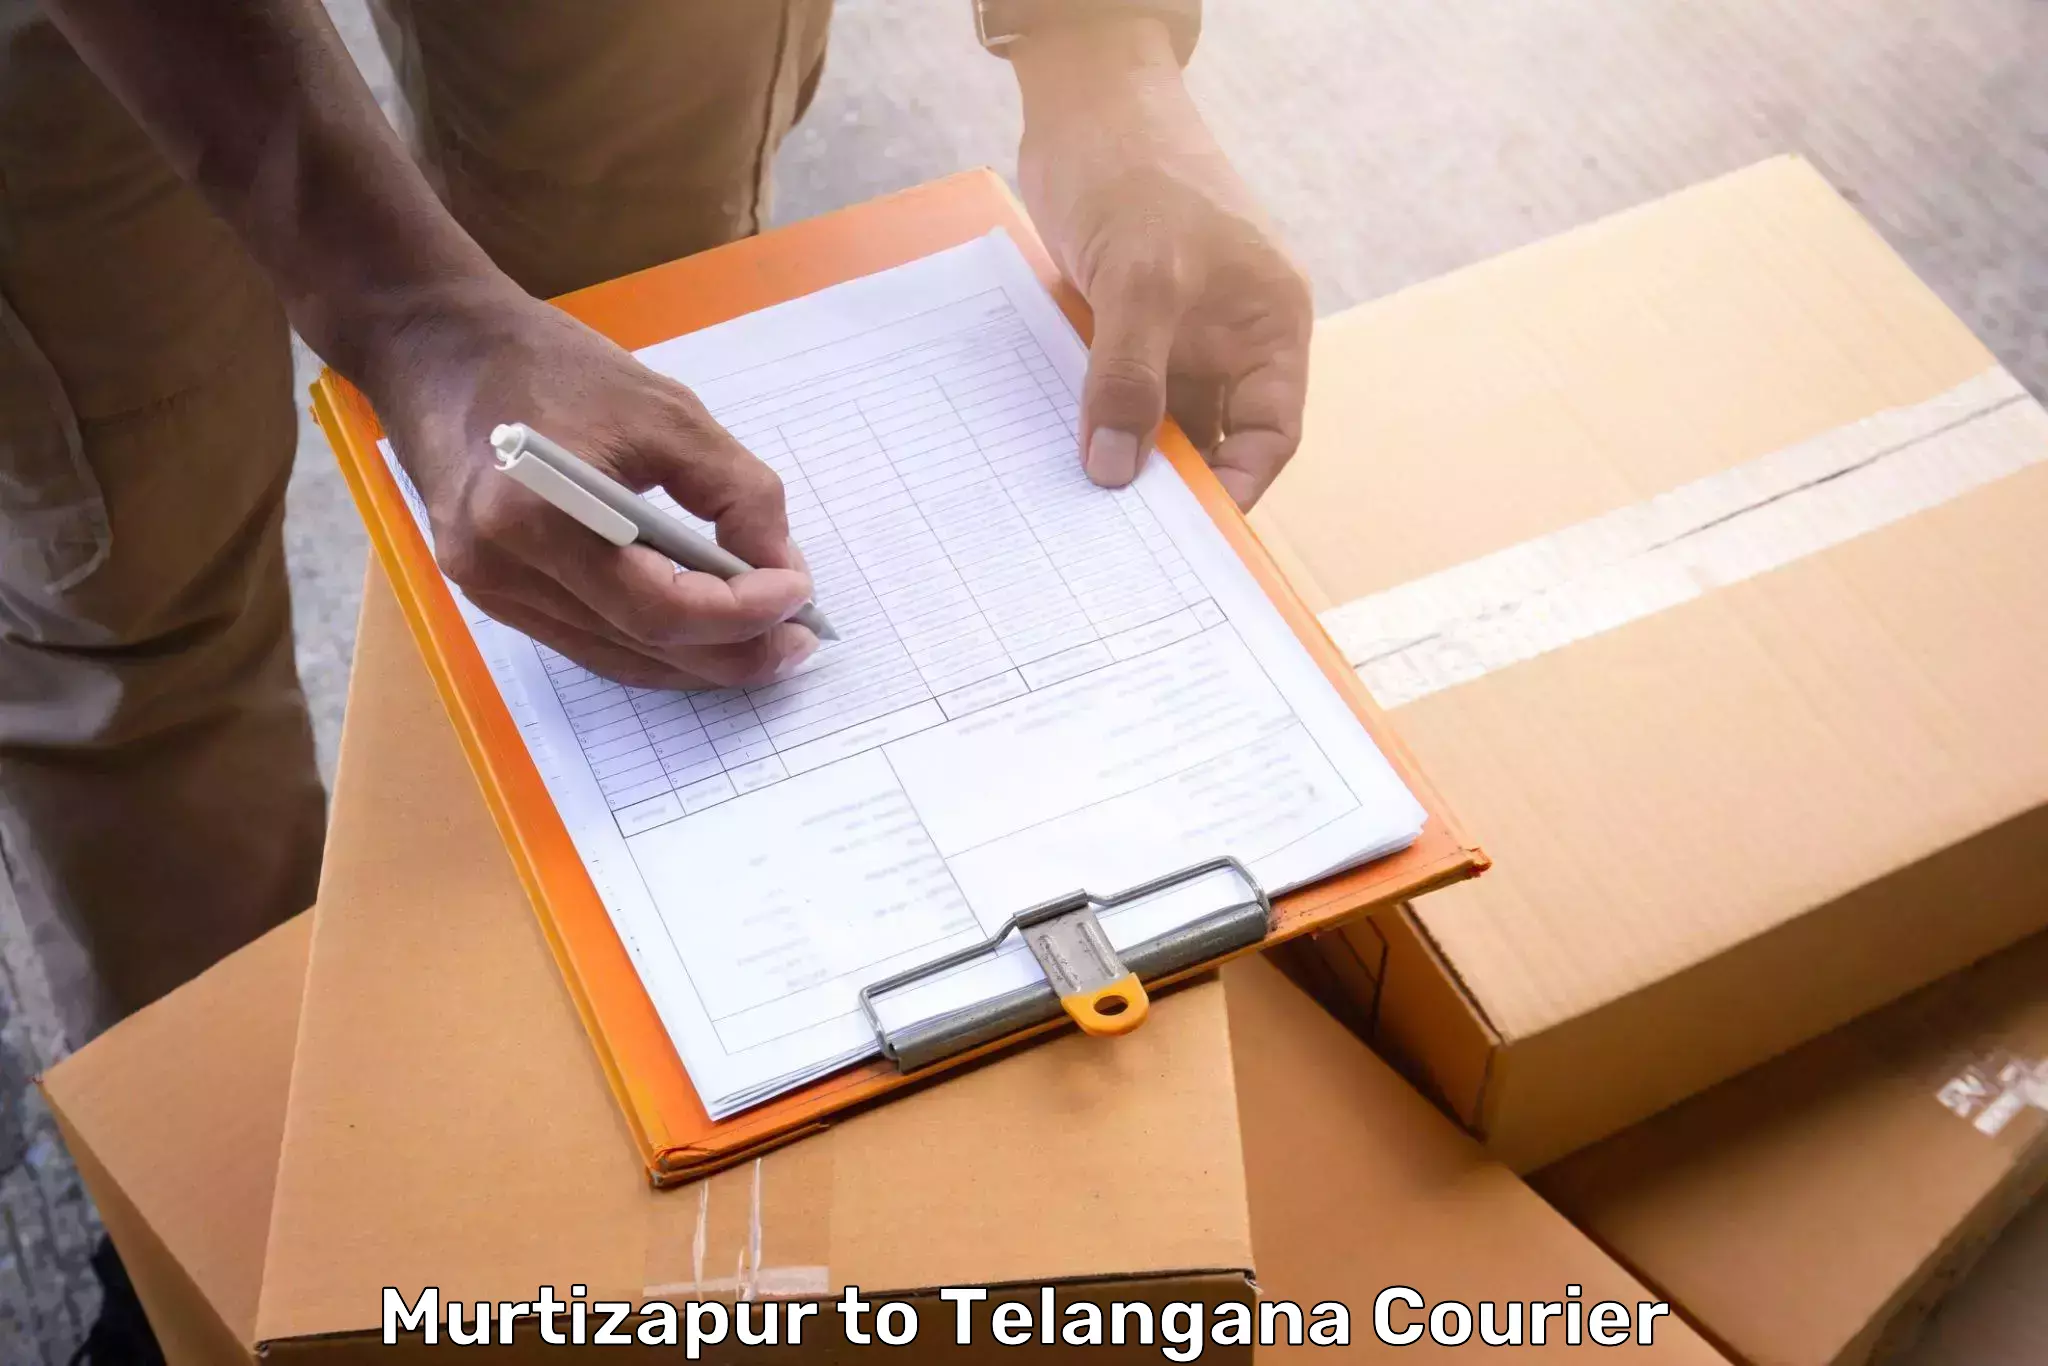 Luggage delivery network in Murtizapur to Professor Jayashankar Telangana State Agricultural University Hyderabad